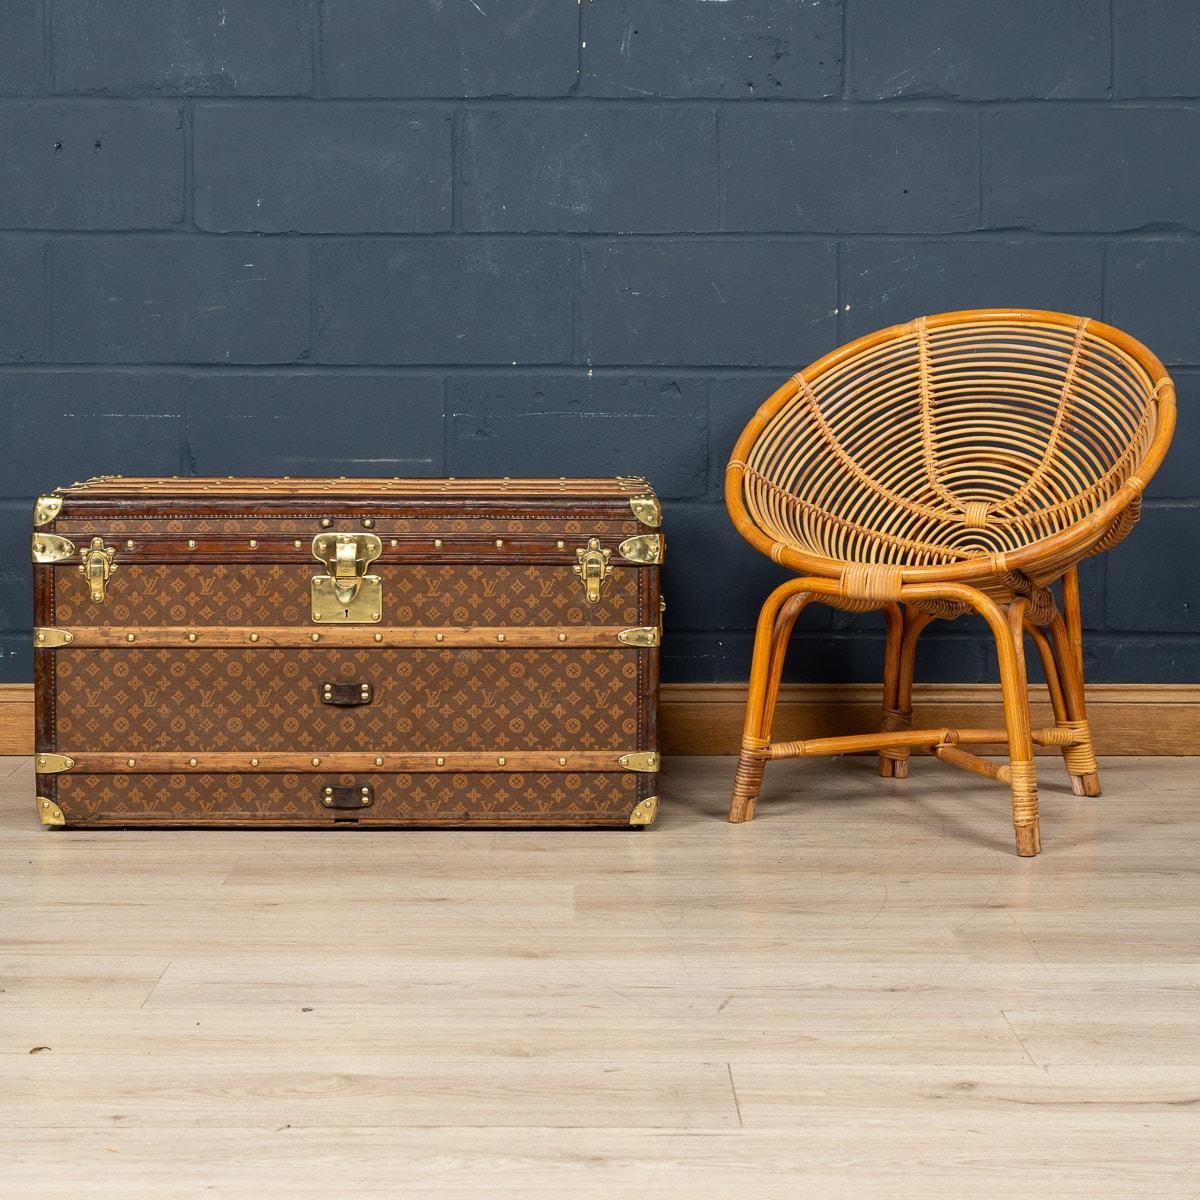 French 20th Century Louis Vuitton Trunk In Monogram Canvas, France, c.1900 For Sale